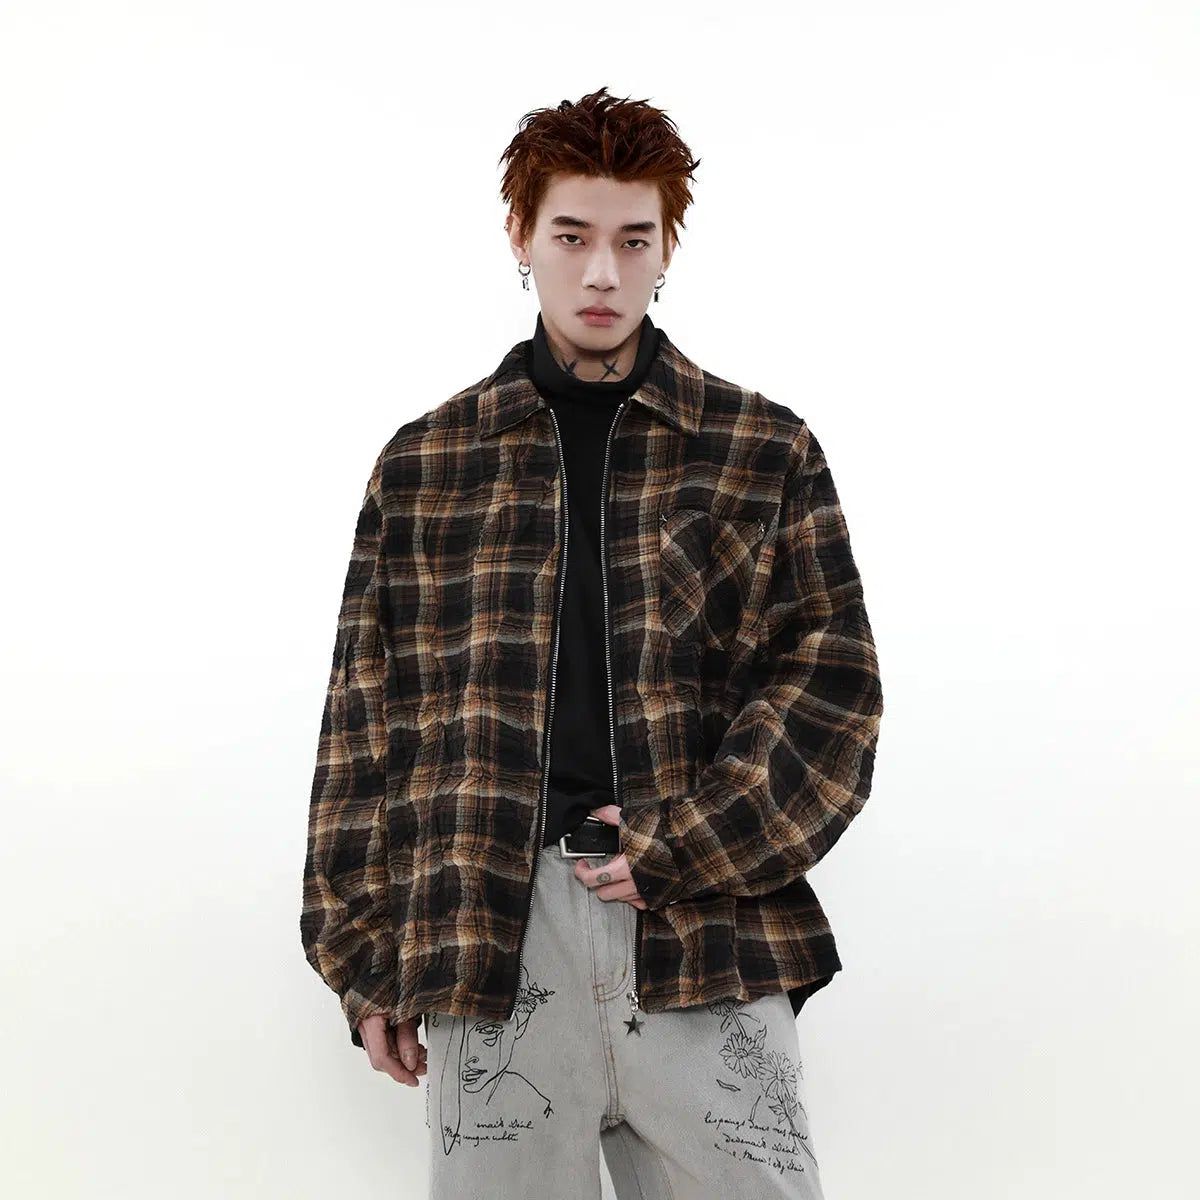 Front Pocket Plaid Shirt Korean Street Fashion Shirt By Mr Nearly Shop Online at OH Vault